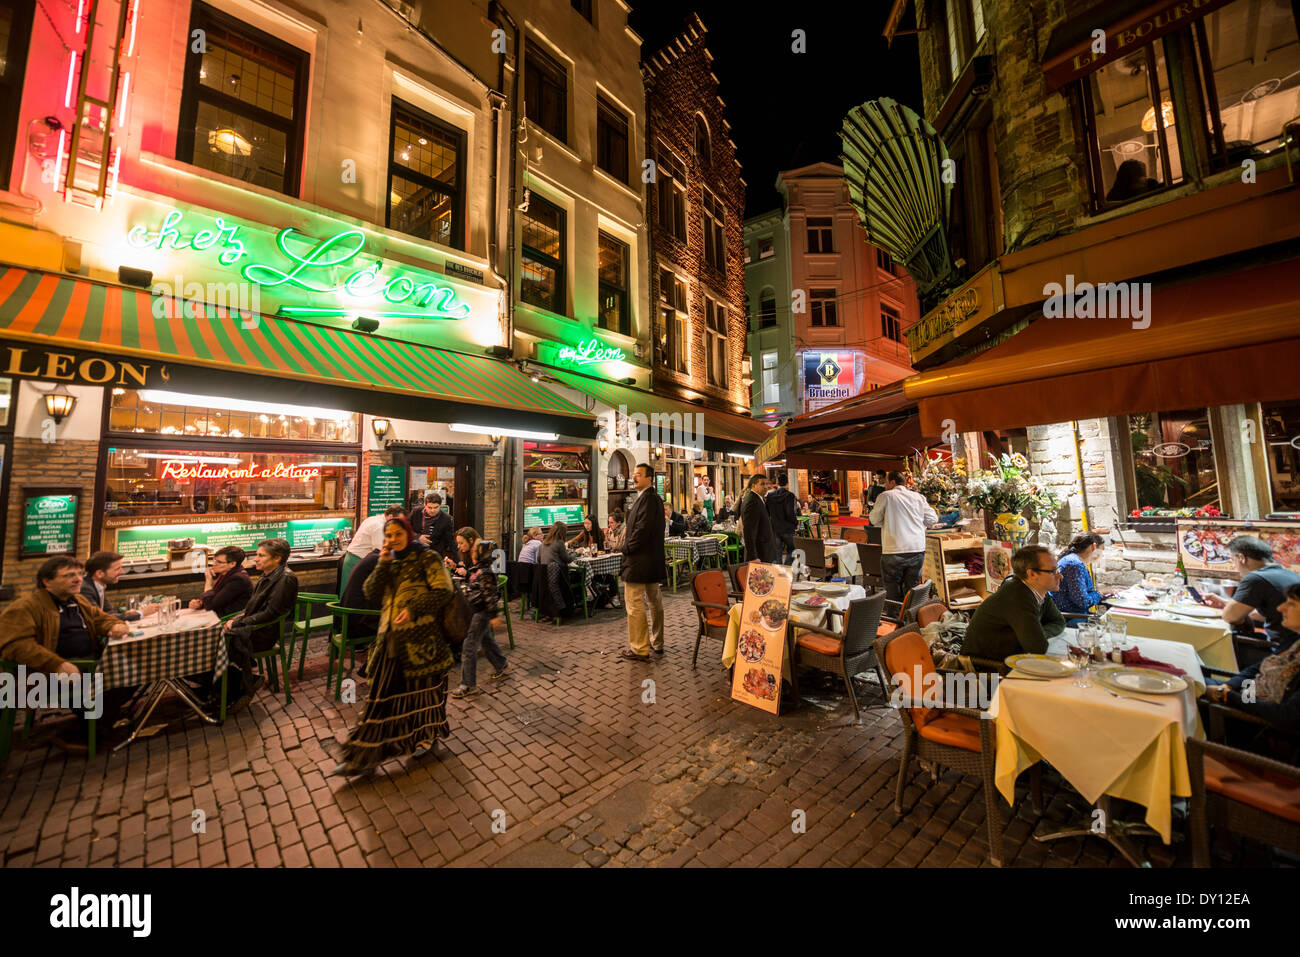 BRUSSELS, Belgium — A popular Brussels restaurant specializing in Belgian mussels, Chez Leon on Rue des Bouchers, sits on a narrow cobblestone street along with a street filled with other restaurants popular with tourists. Stock Photo